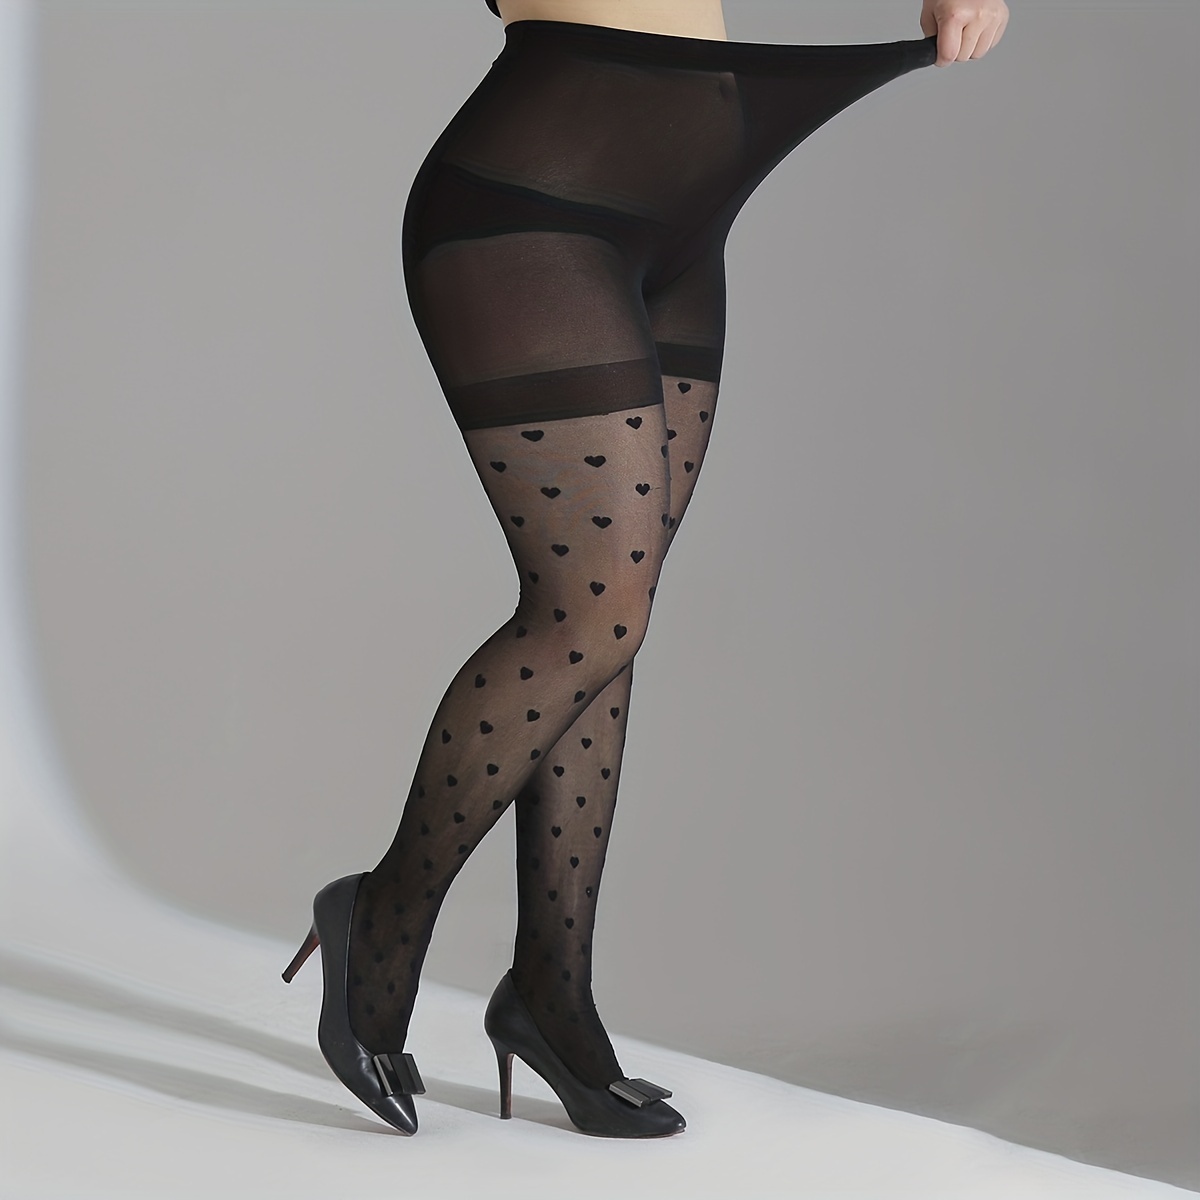 Plus Size Casual Stockings For 0XL-2XL, Women's Plus Solid Semi Sheer  Footed Stretchy High * Tights